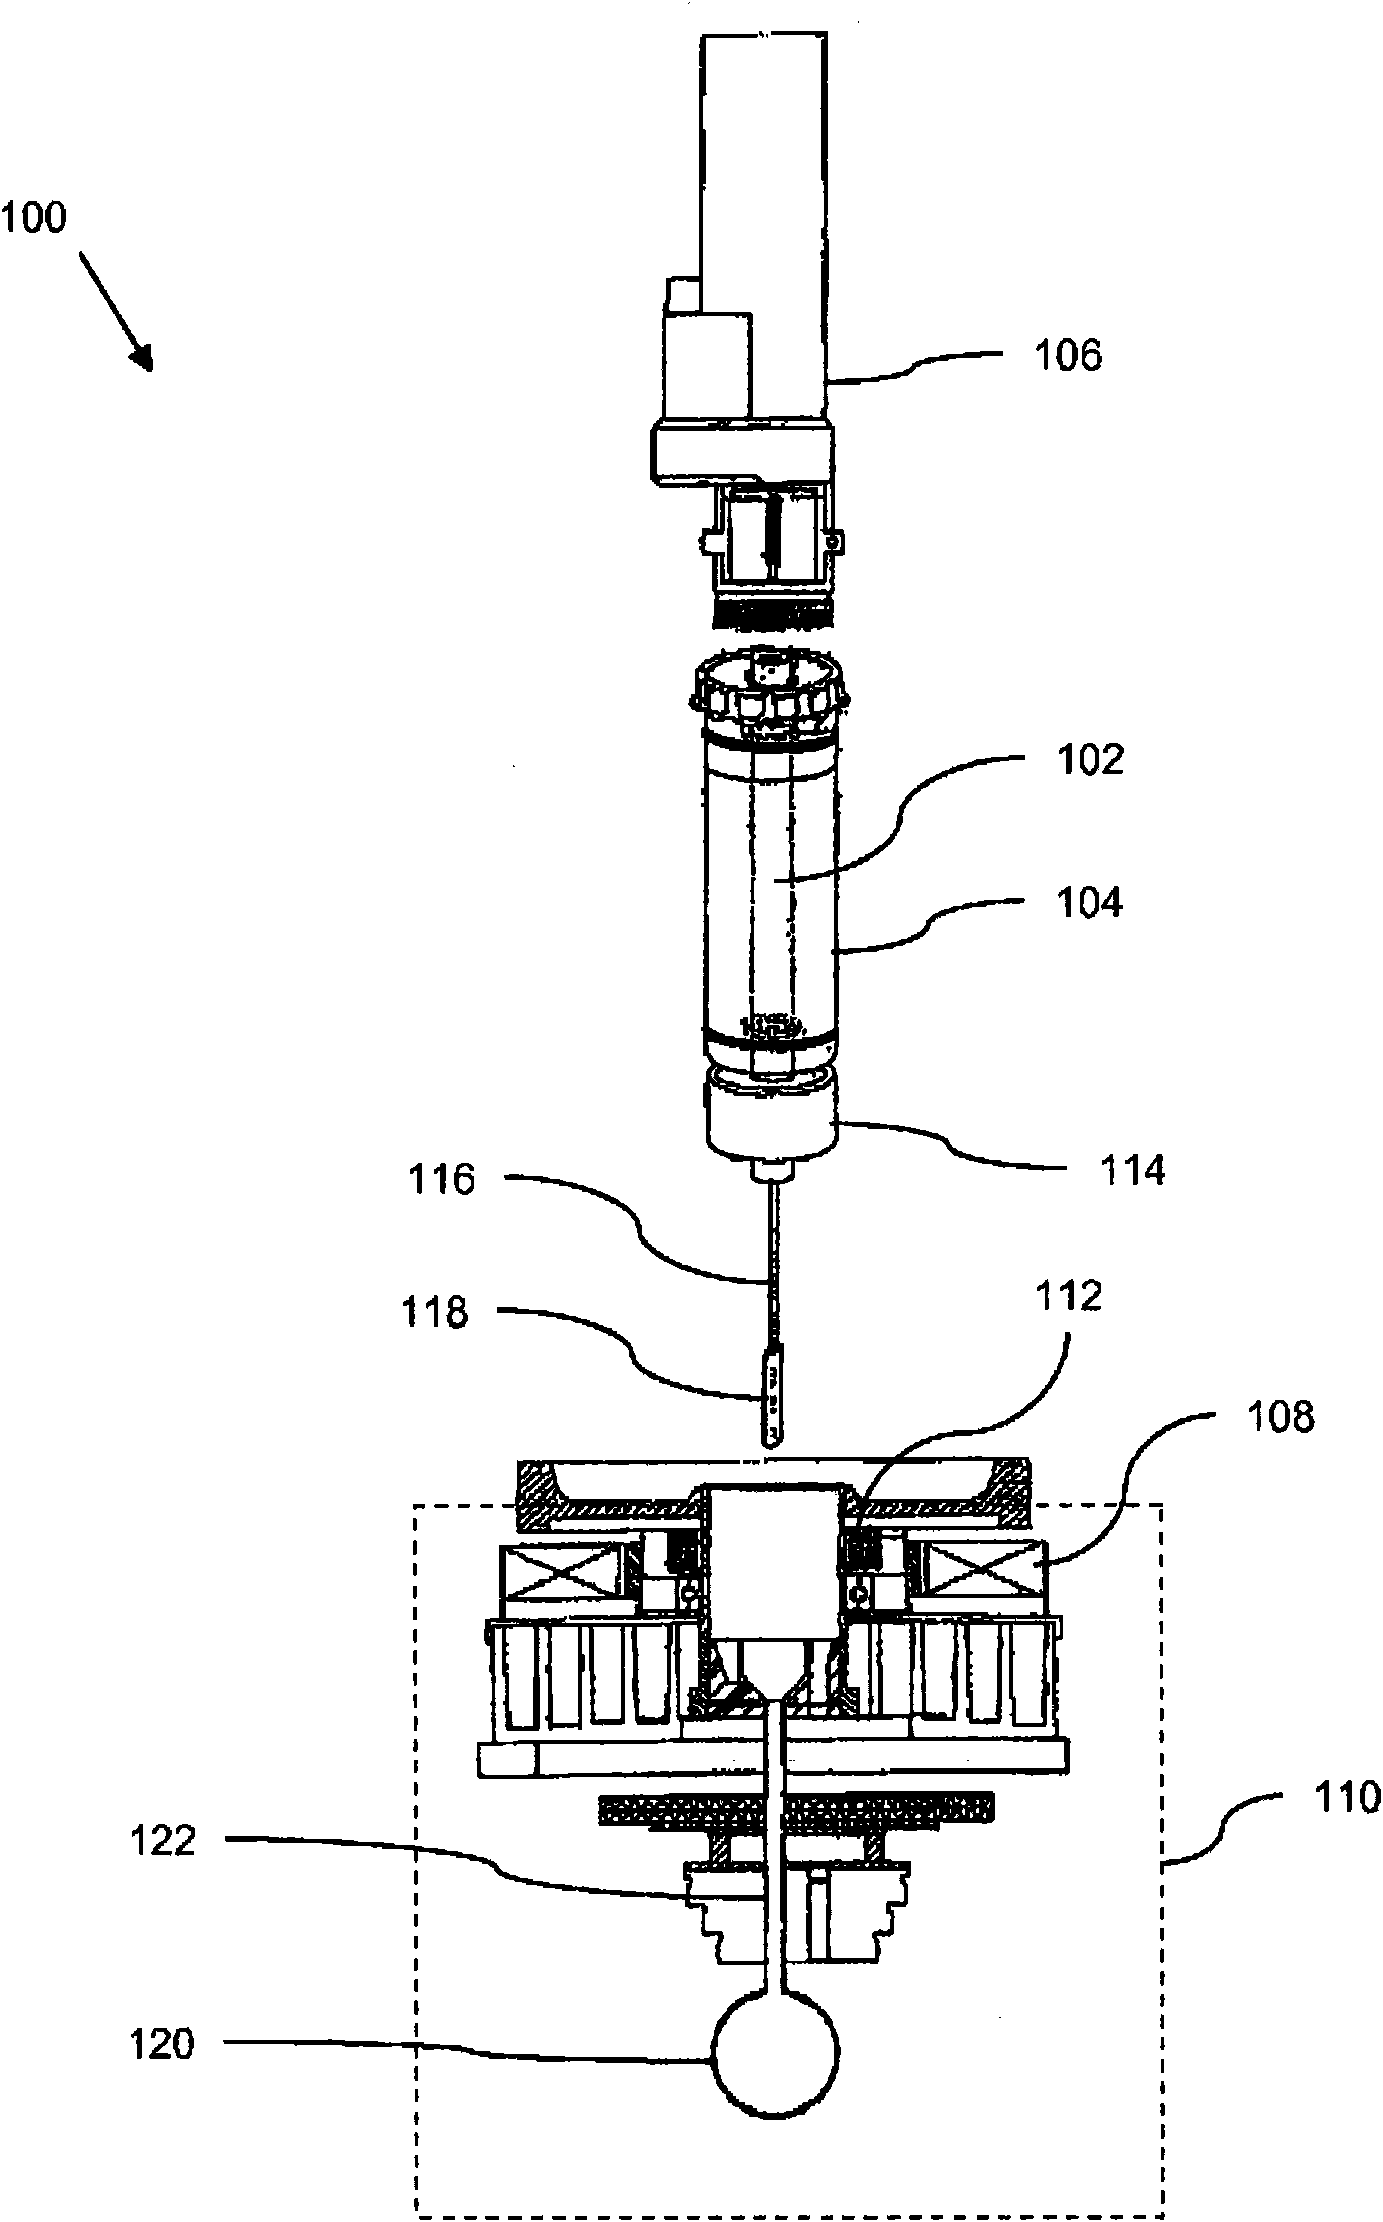 Isothermal titration microcalorimeter apparatus and method of use